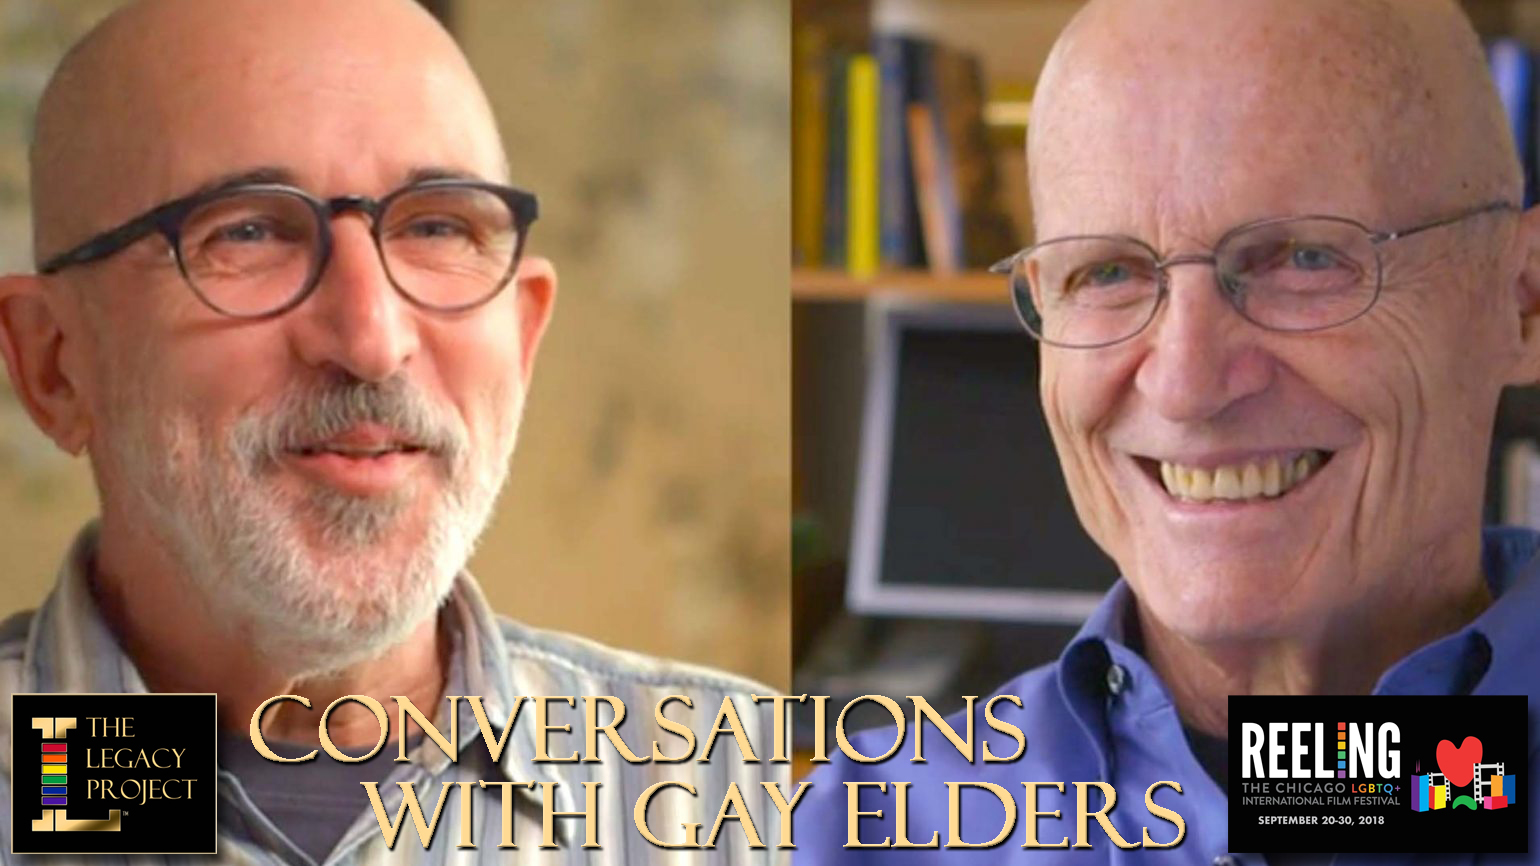 LEGACY LIVE Conversation with Gay Elders at the Reeling Film Festival 2018